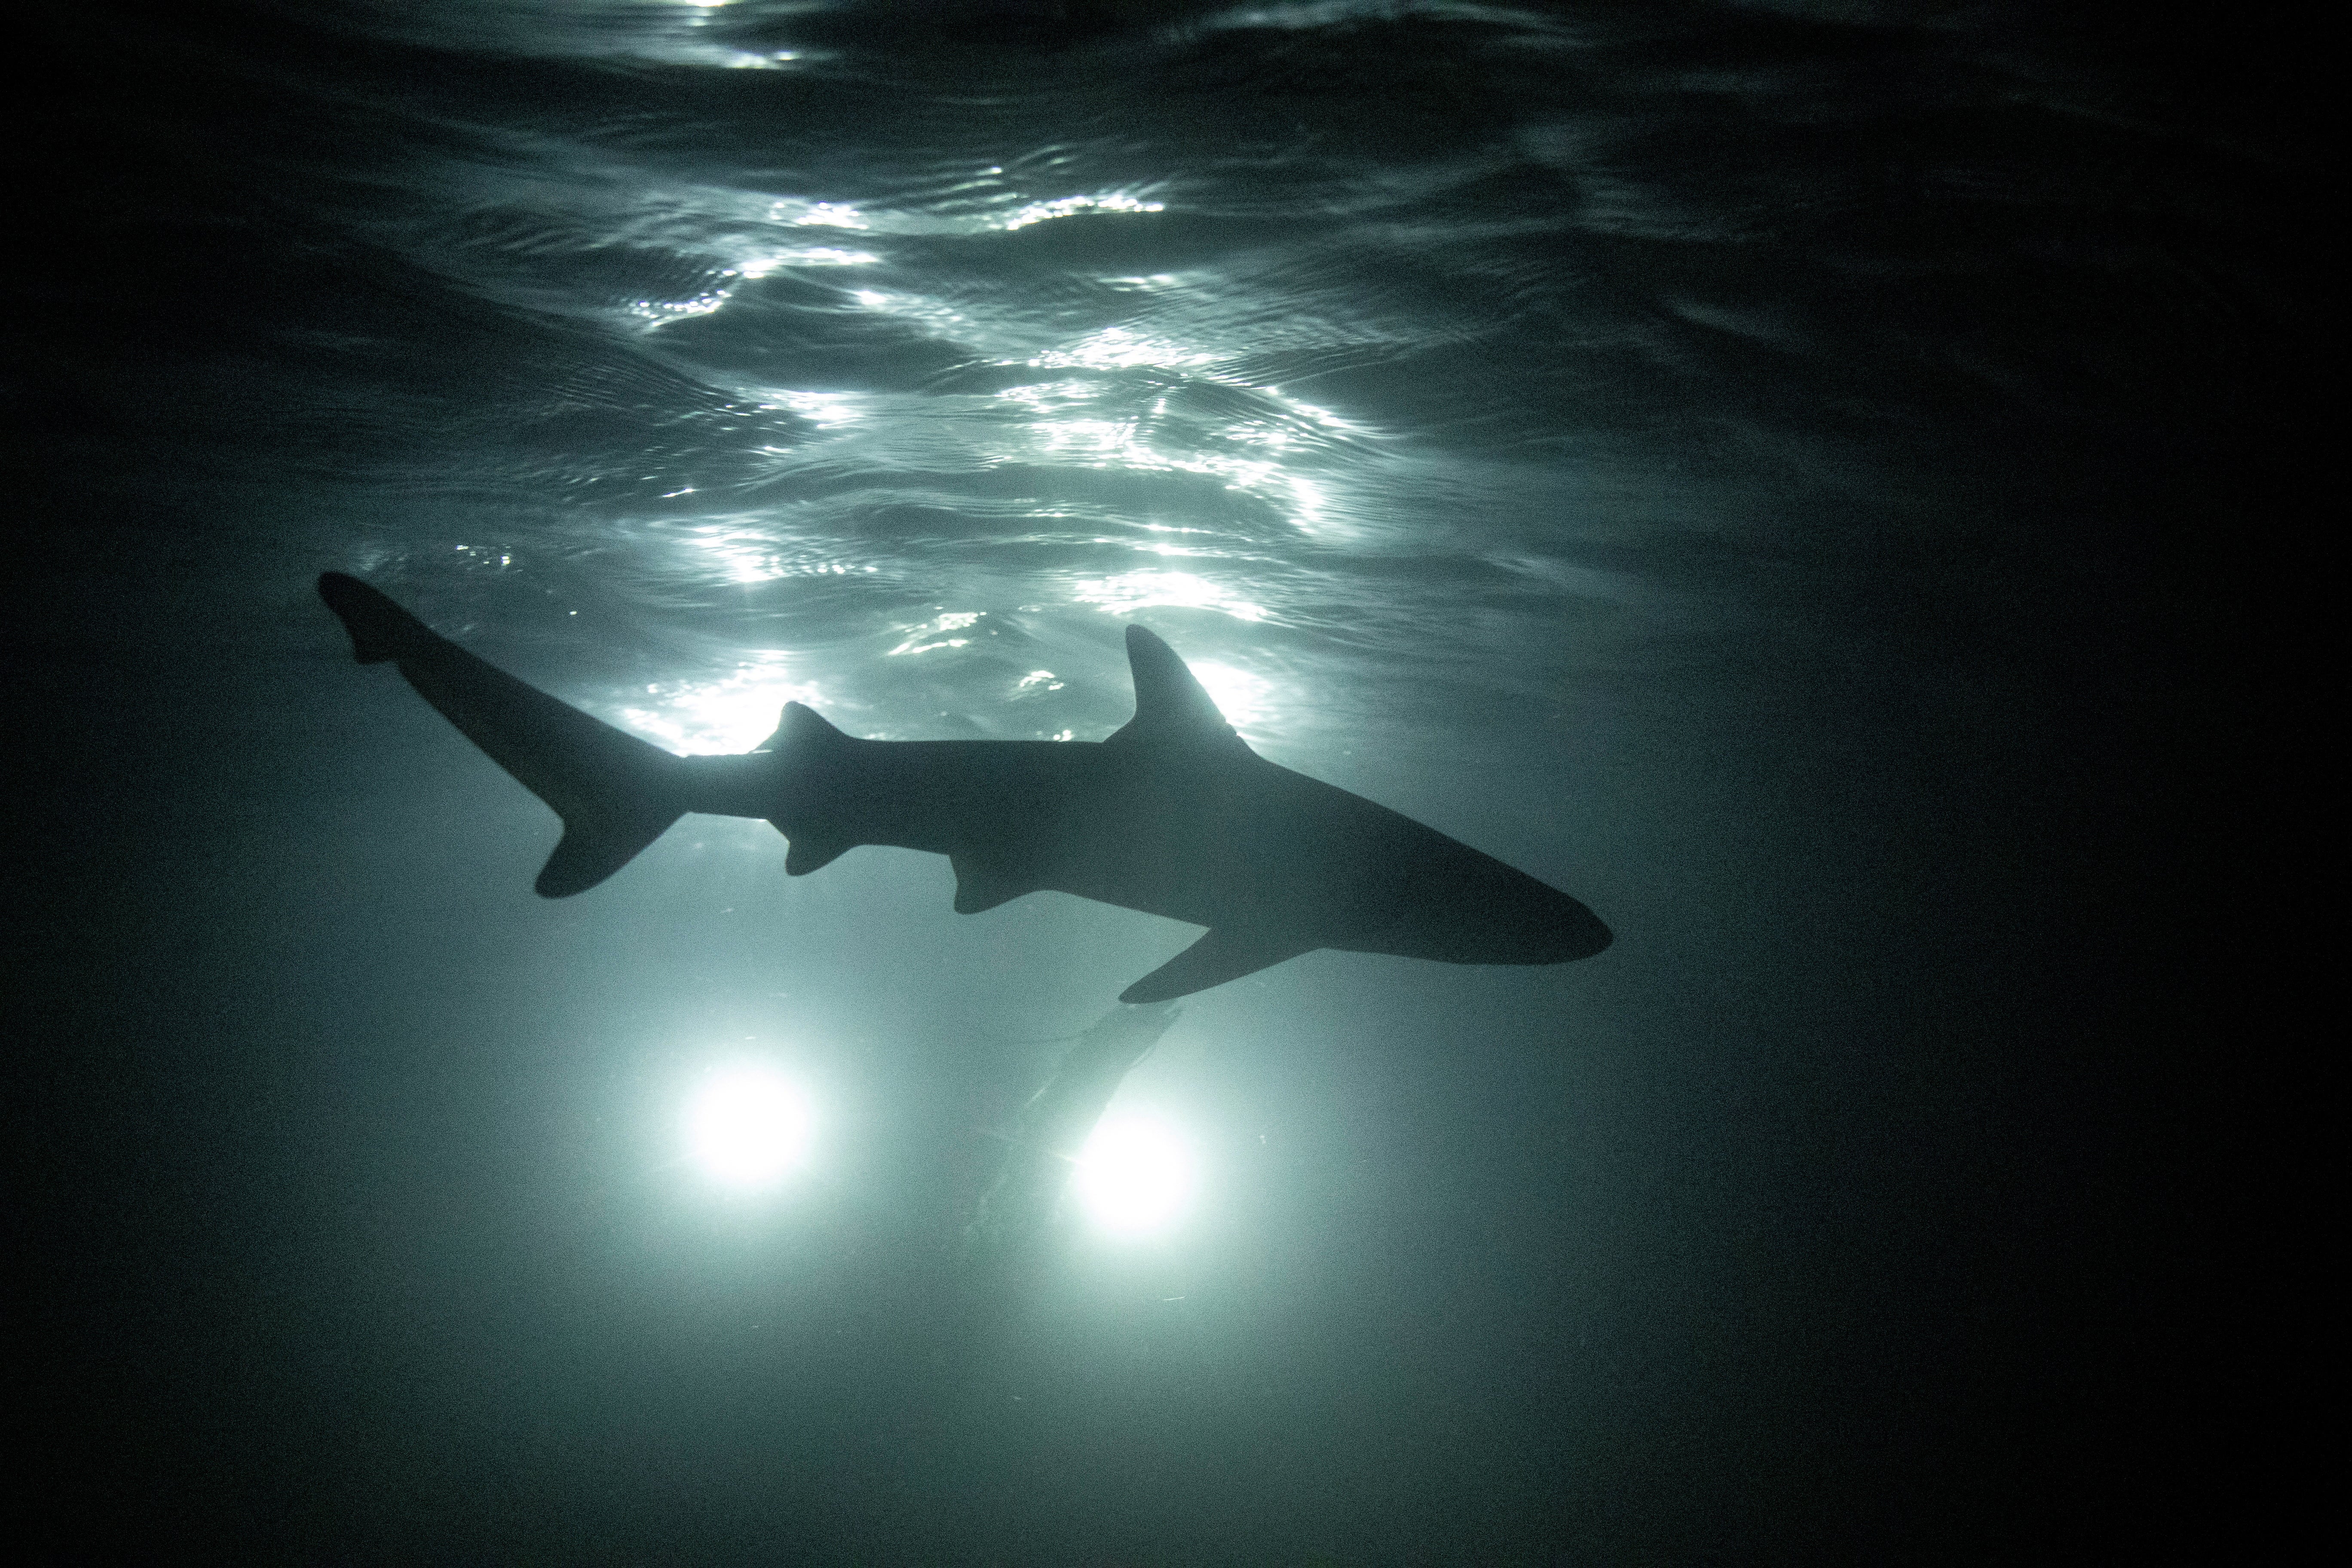 A newborn blacktip reef shark is silhouetted as it swims at night